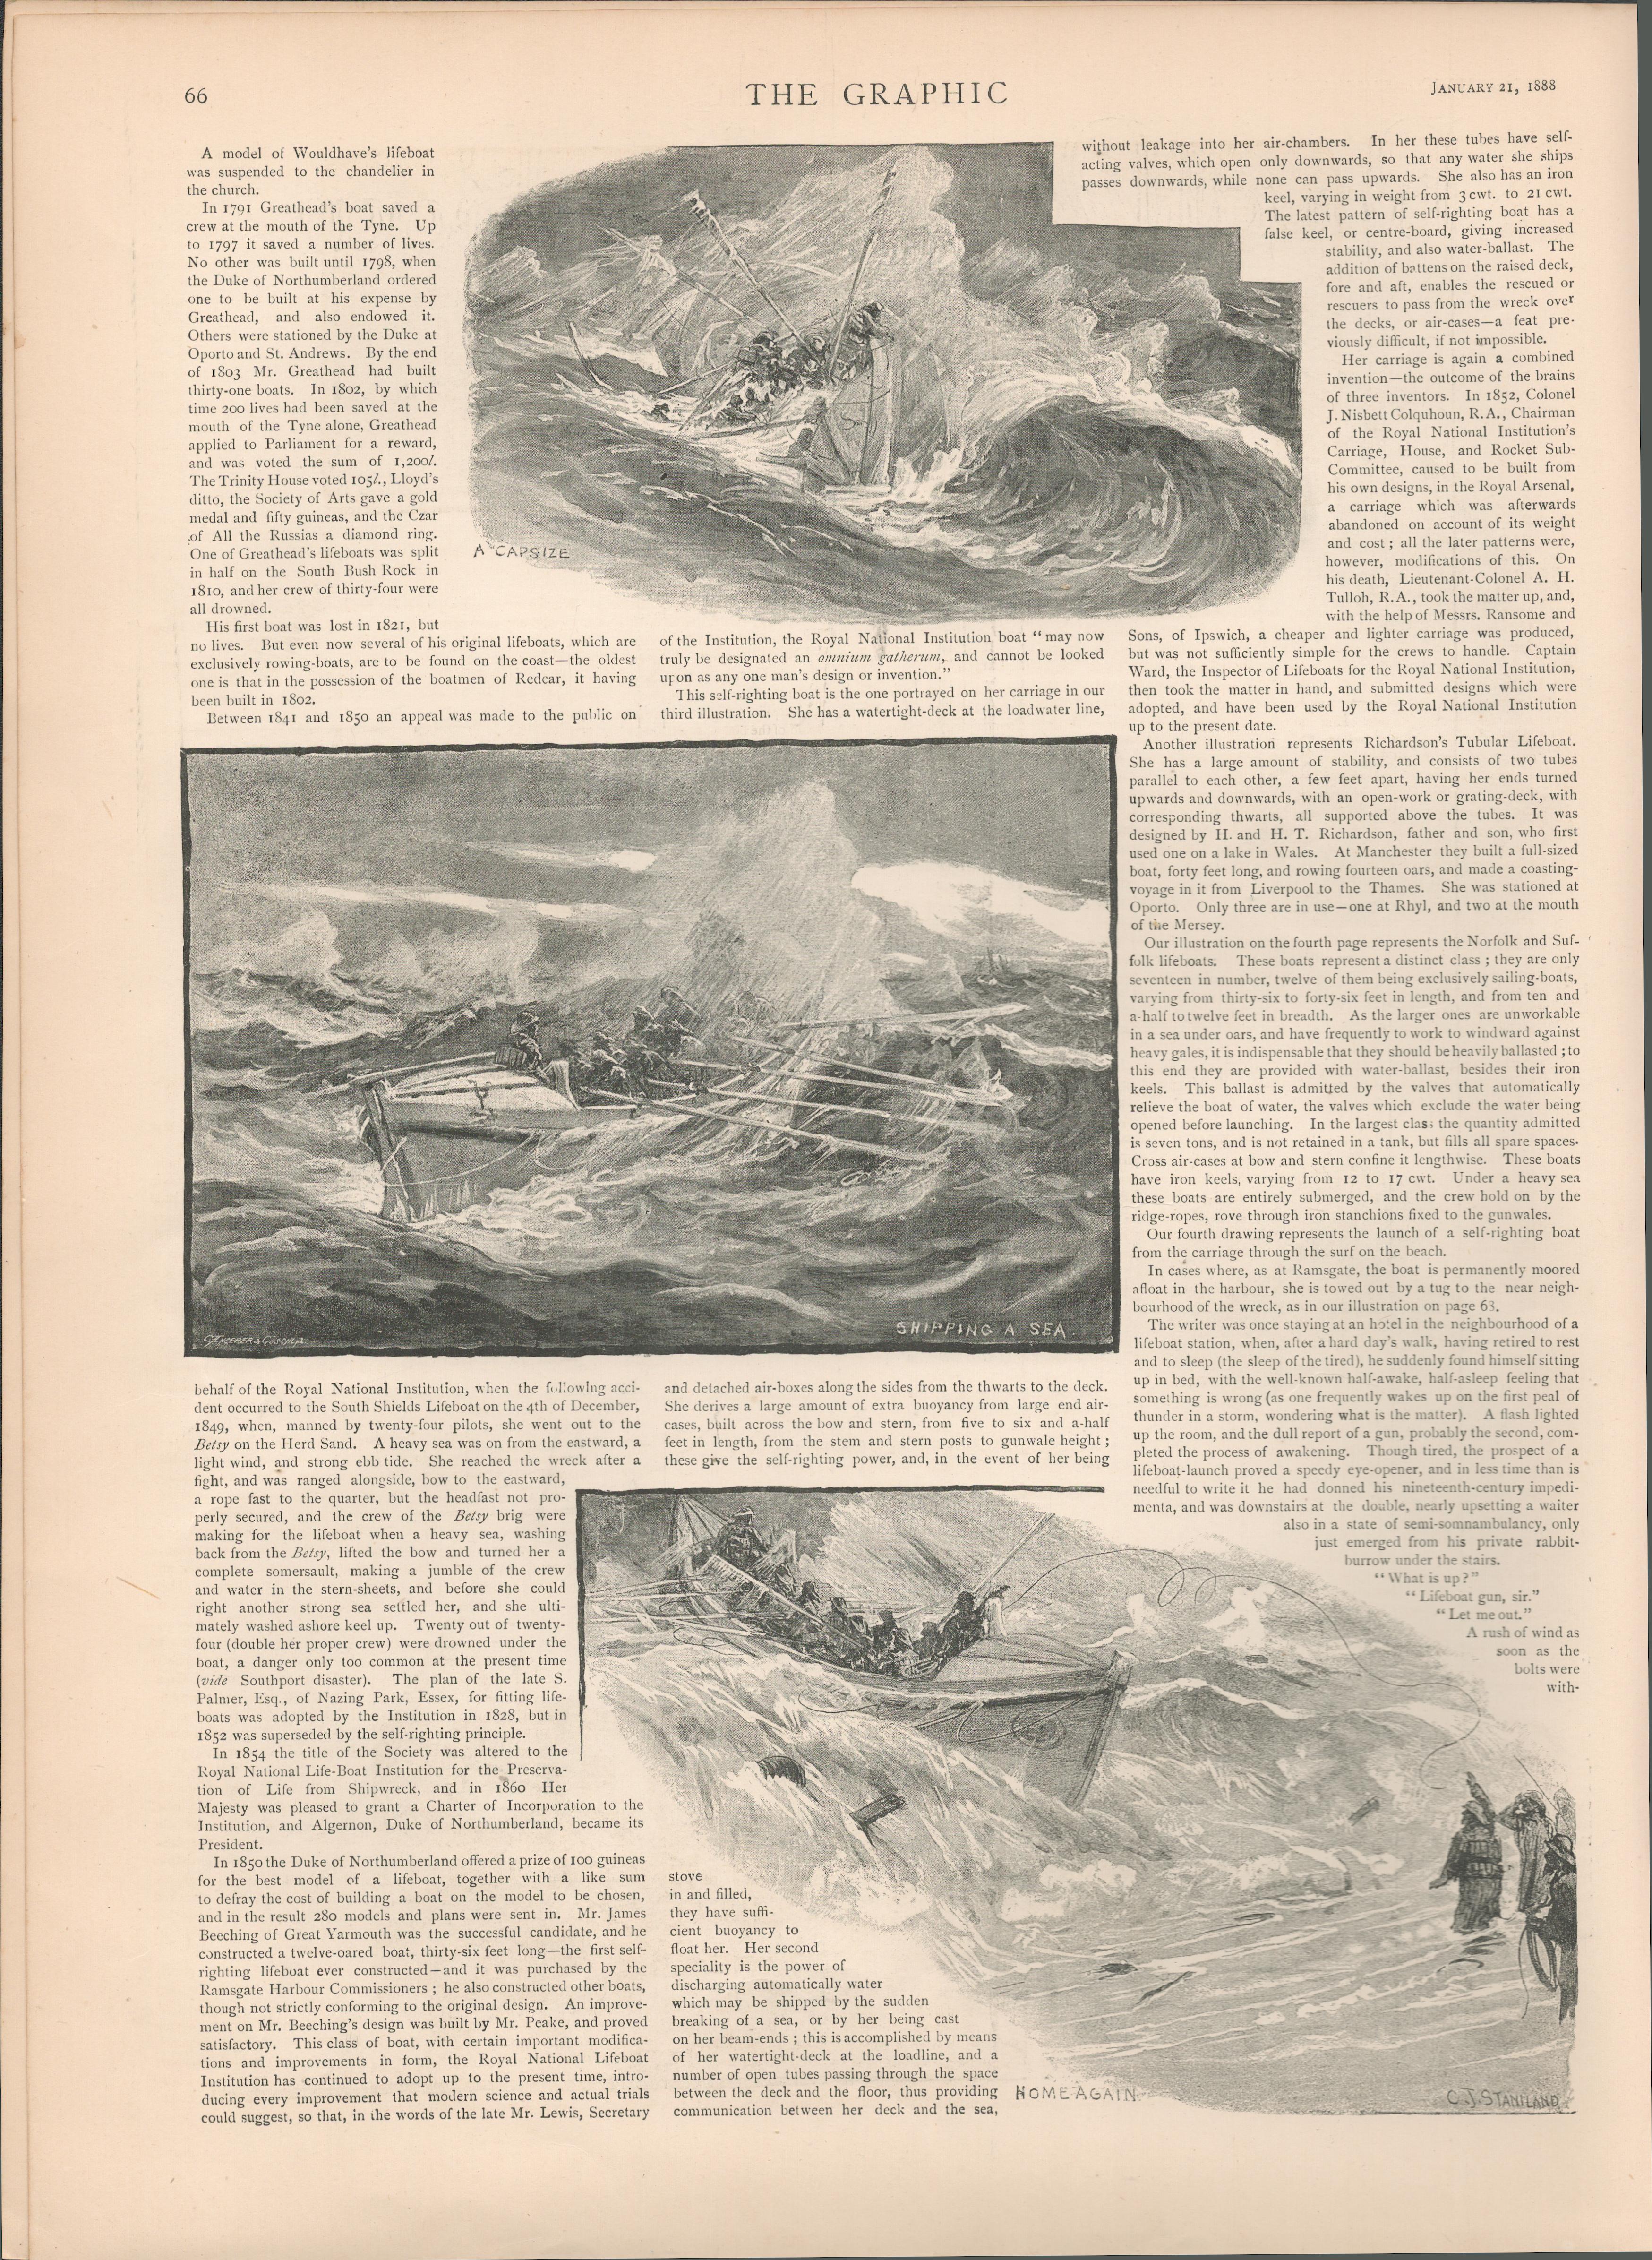 RNLI 4-Page Victorian 1888 Antique Supplement - Image 2 of 4